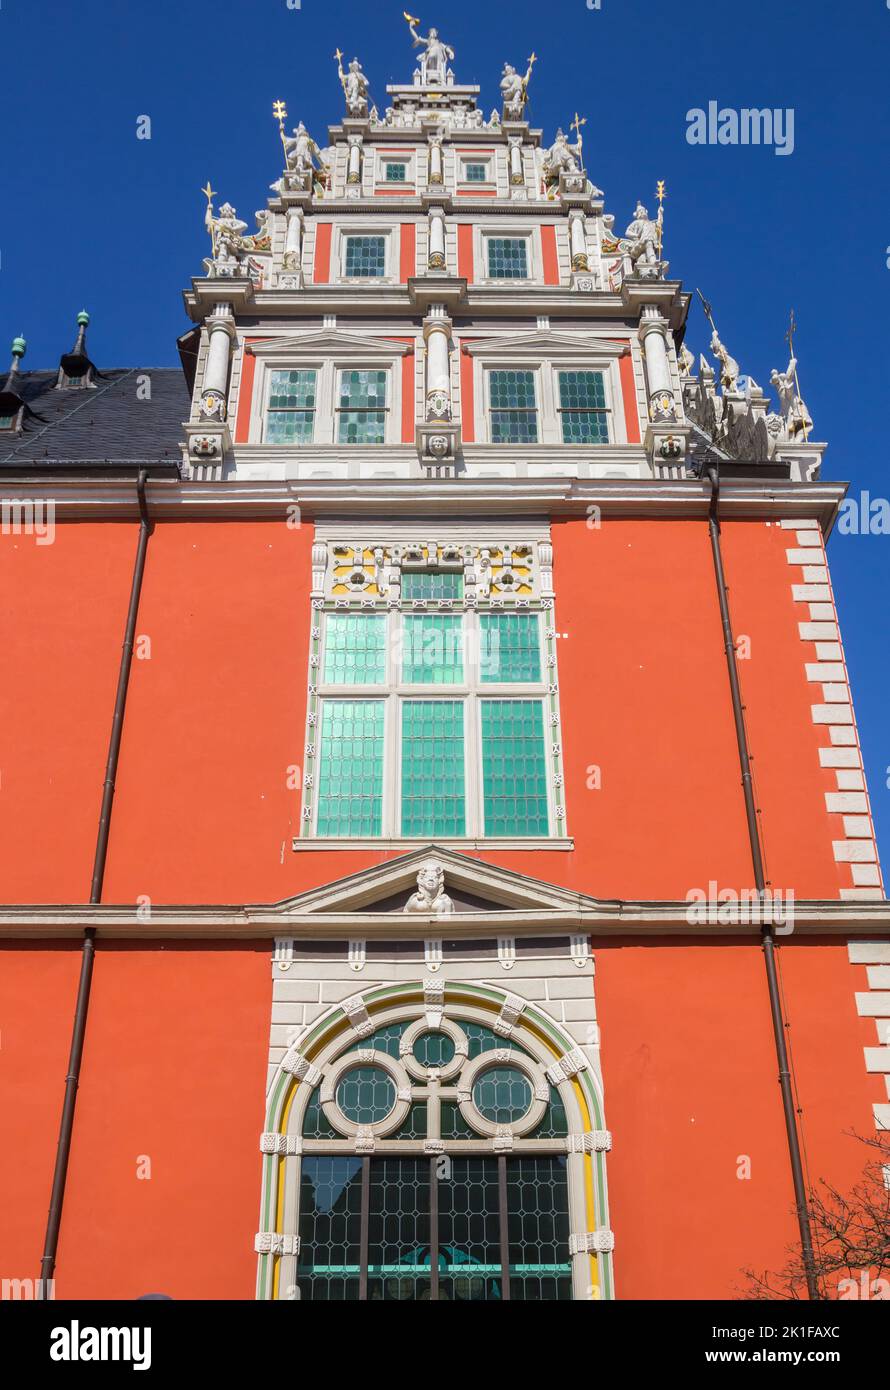 Decorated facade of the historic university in Helmstedt, Germany Stock Photo